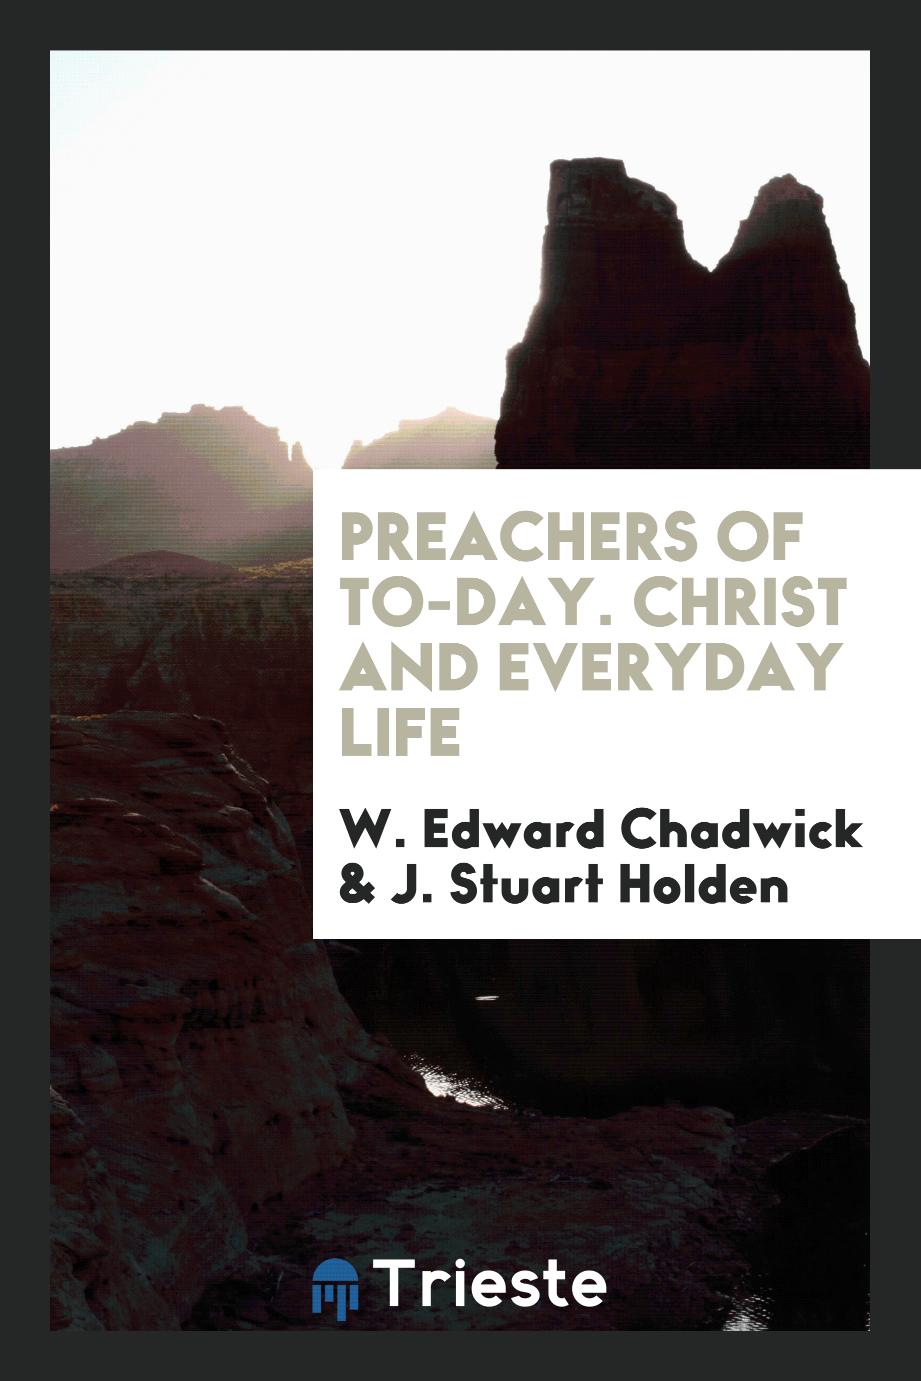 Preachers of To-Day. Christ and Everyday Life